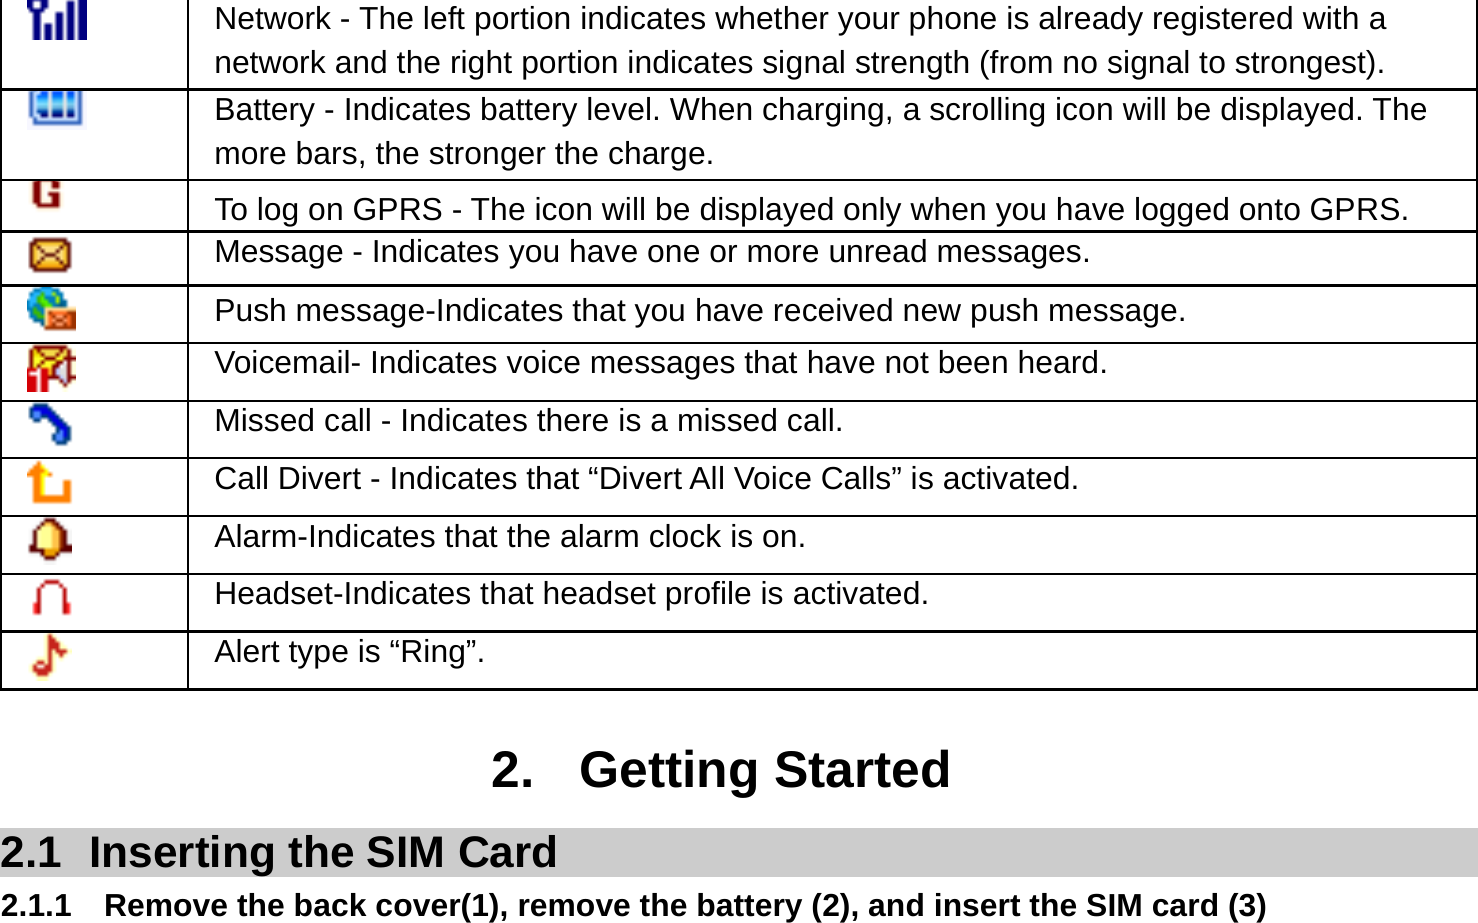   Network - The left portion indicates whether your phone is already registered with a network and the right portion indicates signal strength (from no signal to strongest).  Battery - Indicates battery level. When charging, a scrolling icon will be displayed. The more bars, the stronger the charge.   To log on GPRS - The icon will be displayed only when you have logged onto GPRS.  Message - Indicates you have one or more unread messages.  Push message-Indicates that you have received new push message.  Voicemail- Indicates voice messages that have not been heard.  Missed call - Indicates there is a missed call.  Call Divert - Indicates that “Divert All Voice Calls” is activated.  Alarm-Indicates that the alarm clock is on.  Headset-Indicates that headset profile is activated.  Alert type is “Ring”.  2. Getting Started 2.1  Inserting the SIM Card 2.1.1  Remove the back cover(1), remove the battery (2), and insert the SIM card (3) 